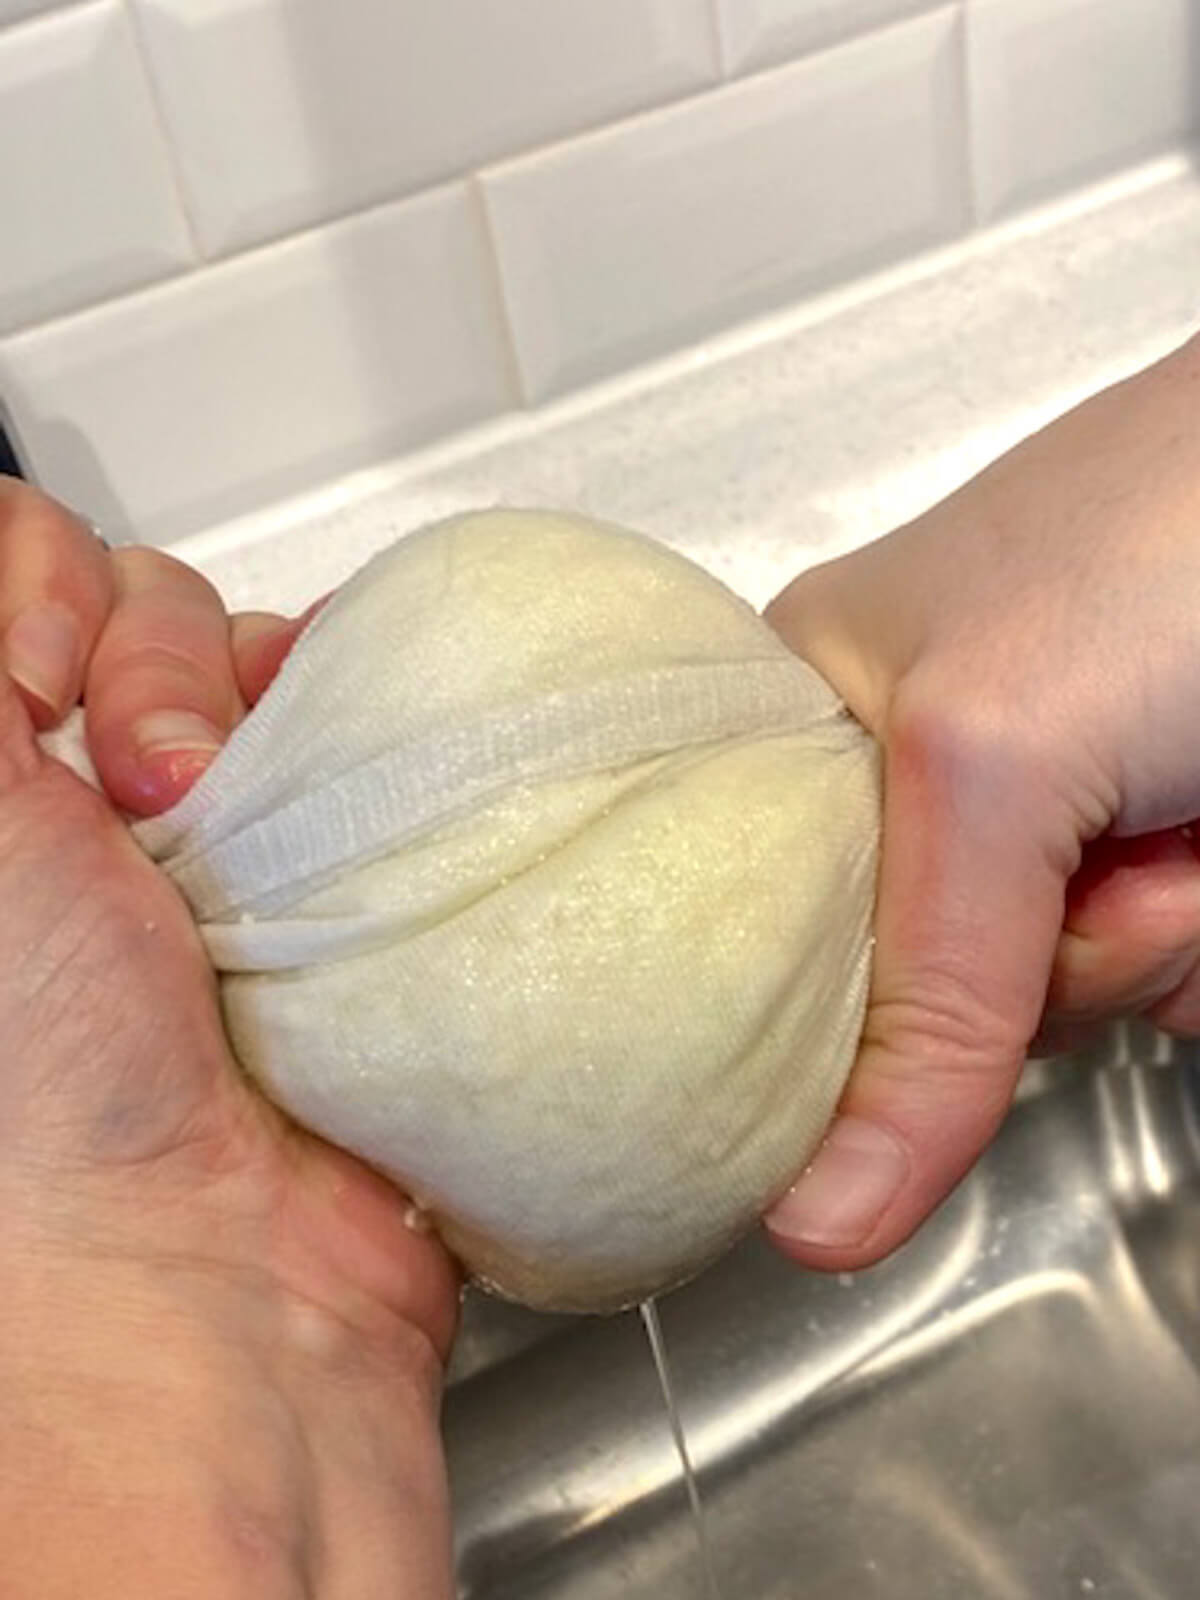 Squeezing water out of the cauliflower rice that's wrapped in a flour sack towel